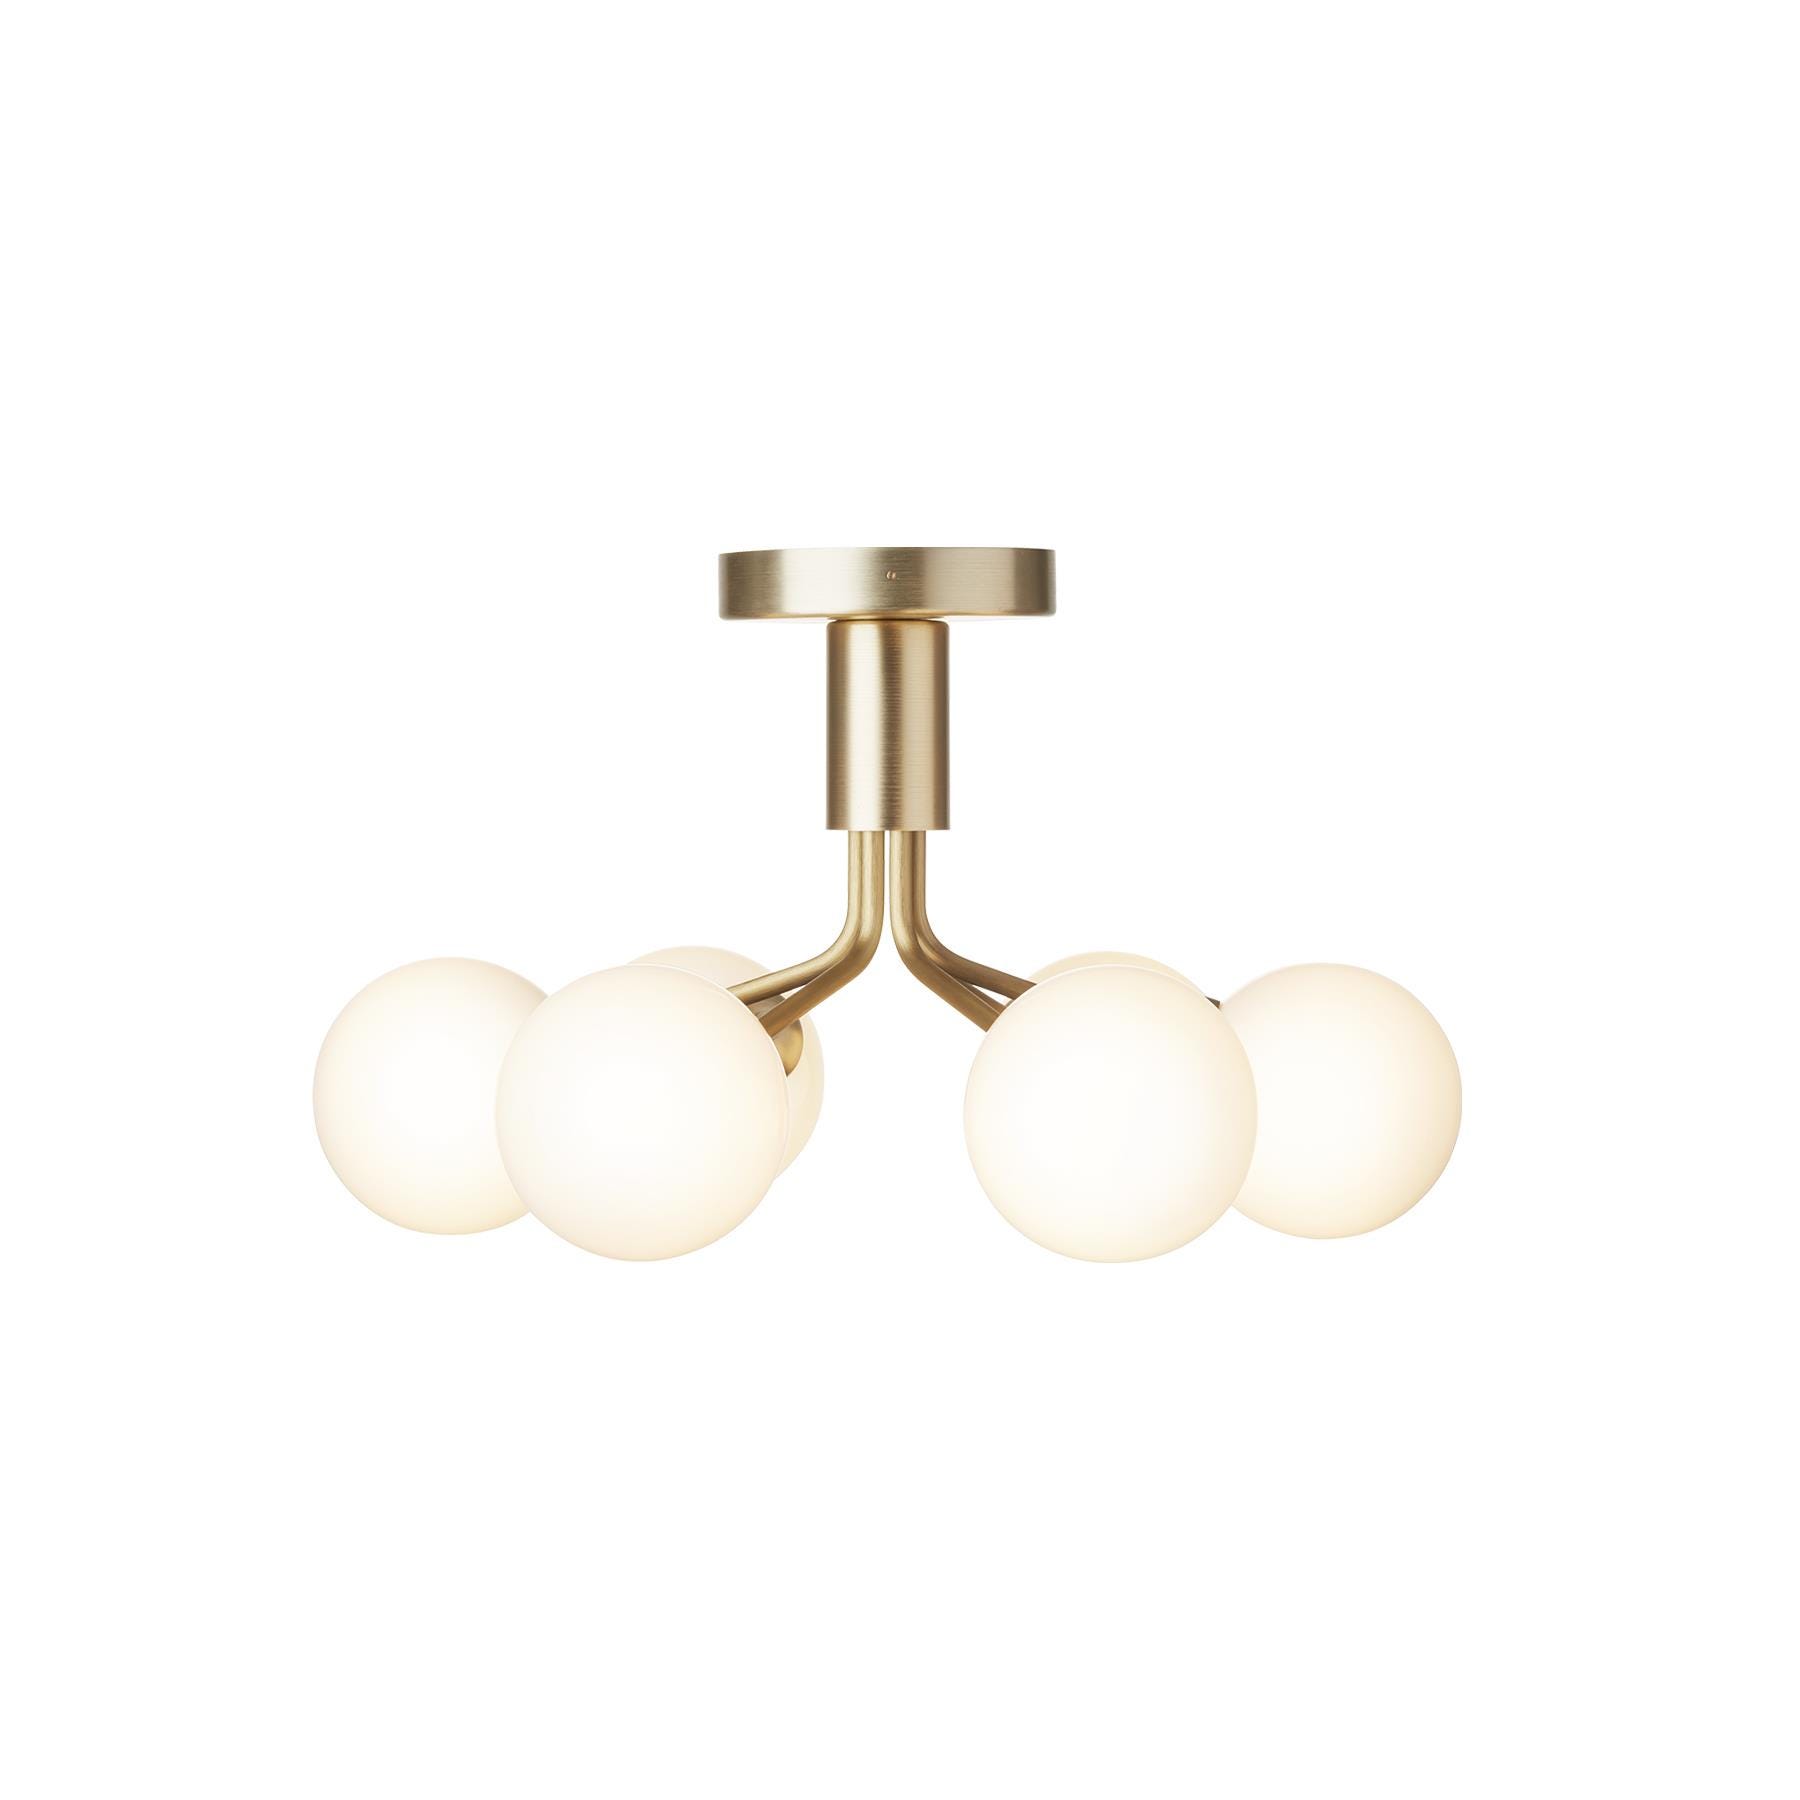 Nuura Apiales 6 Ceiling Light Brushed Brass Opal White Brassgold